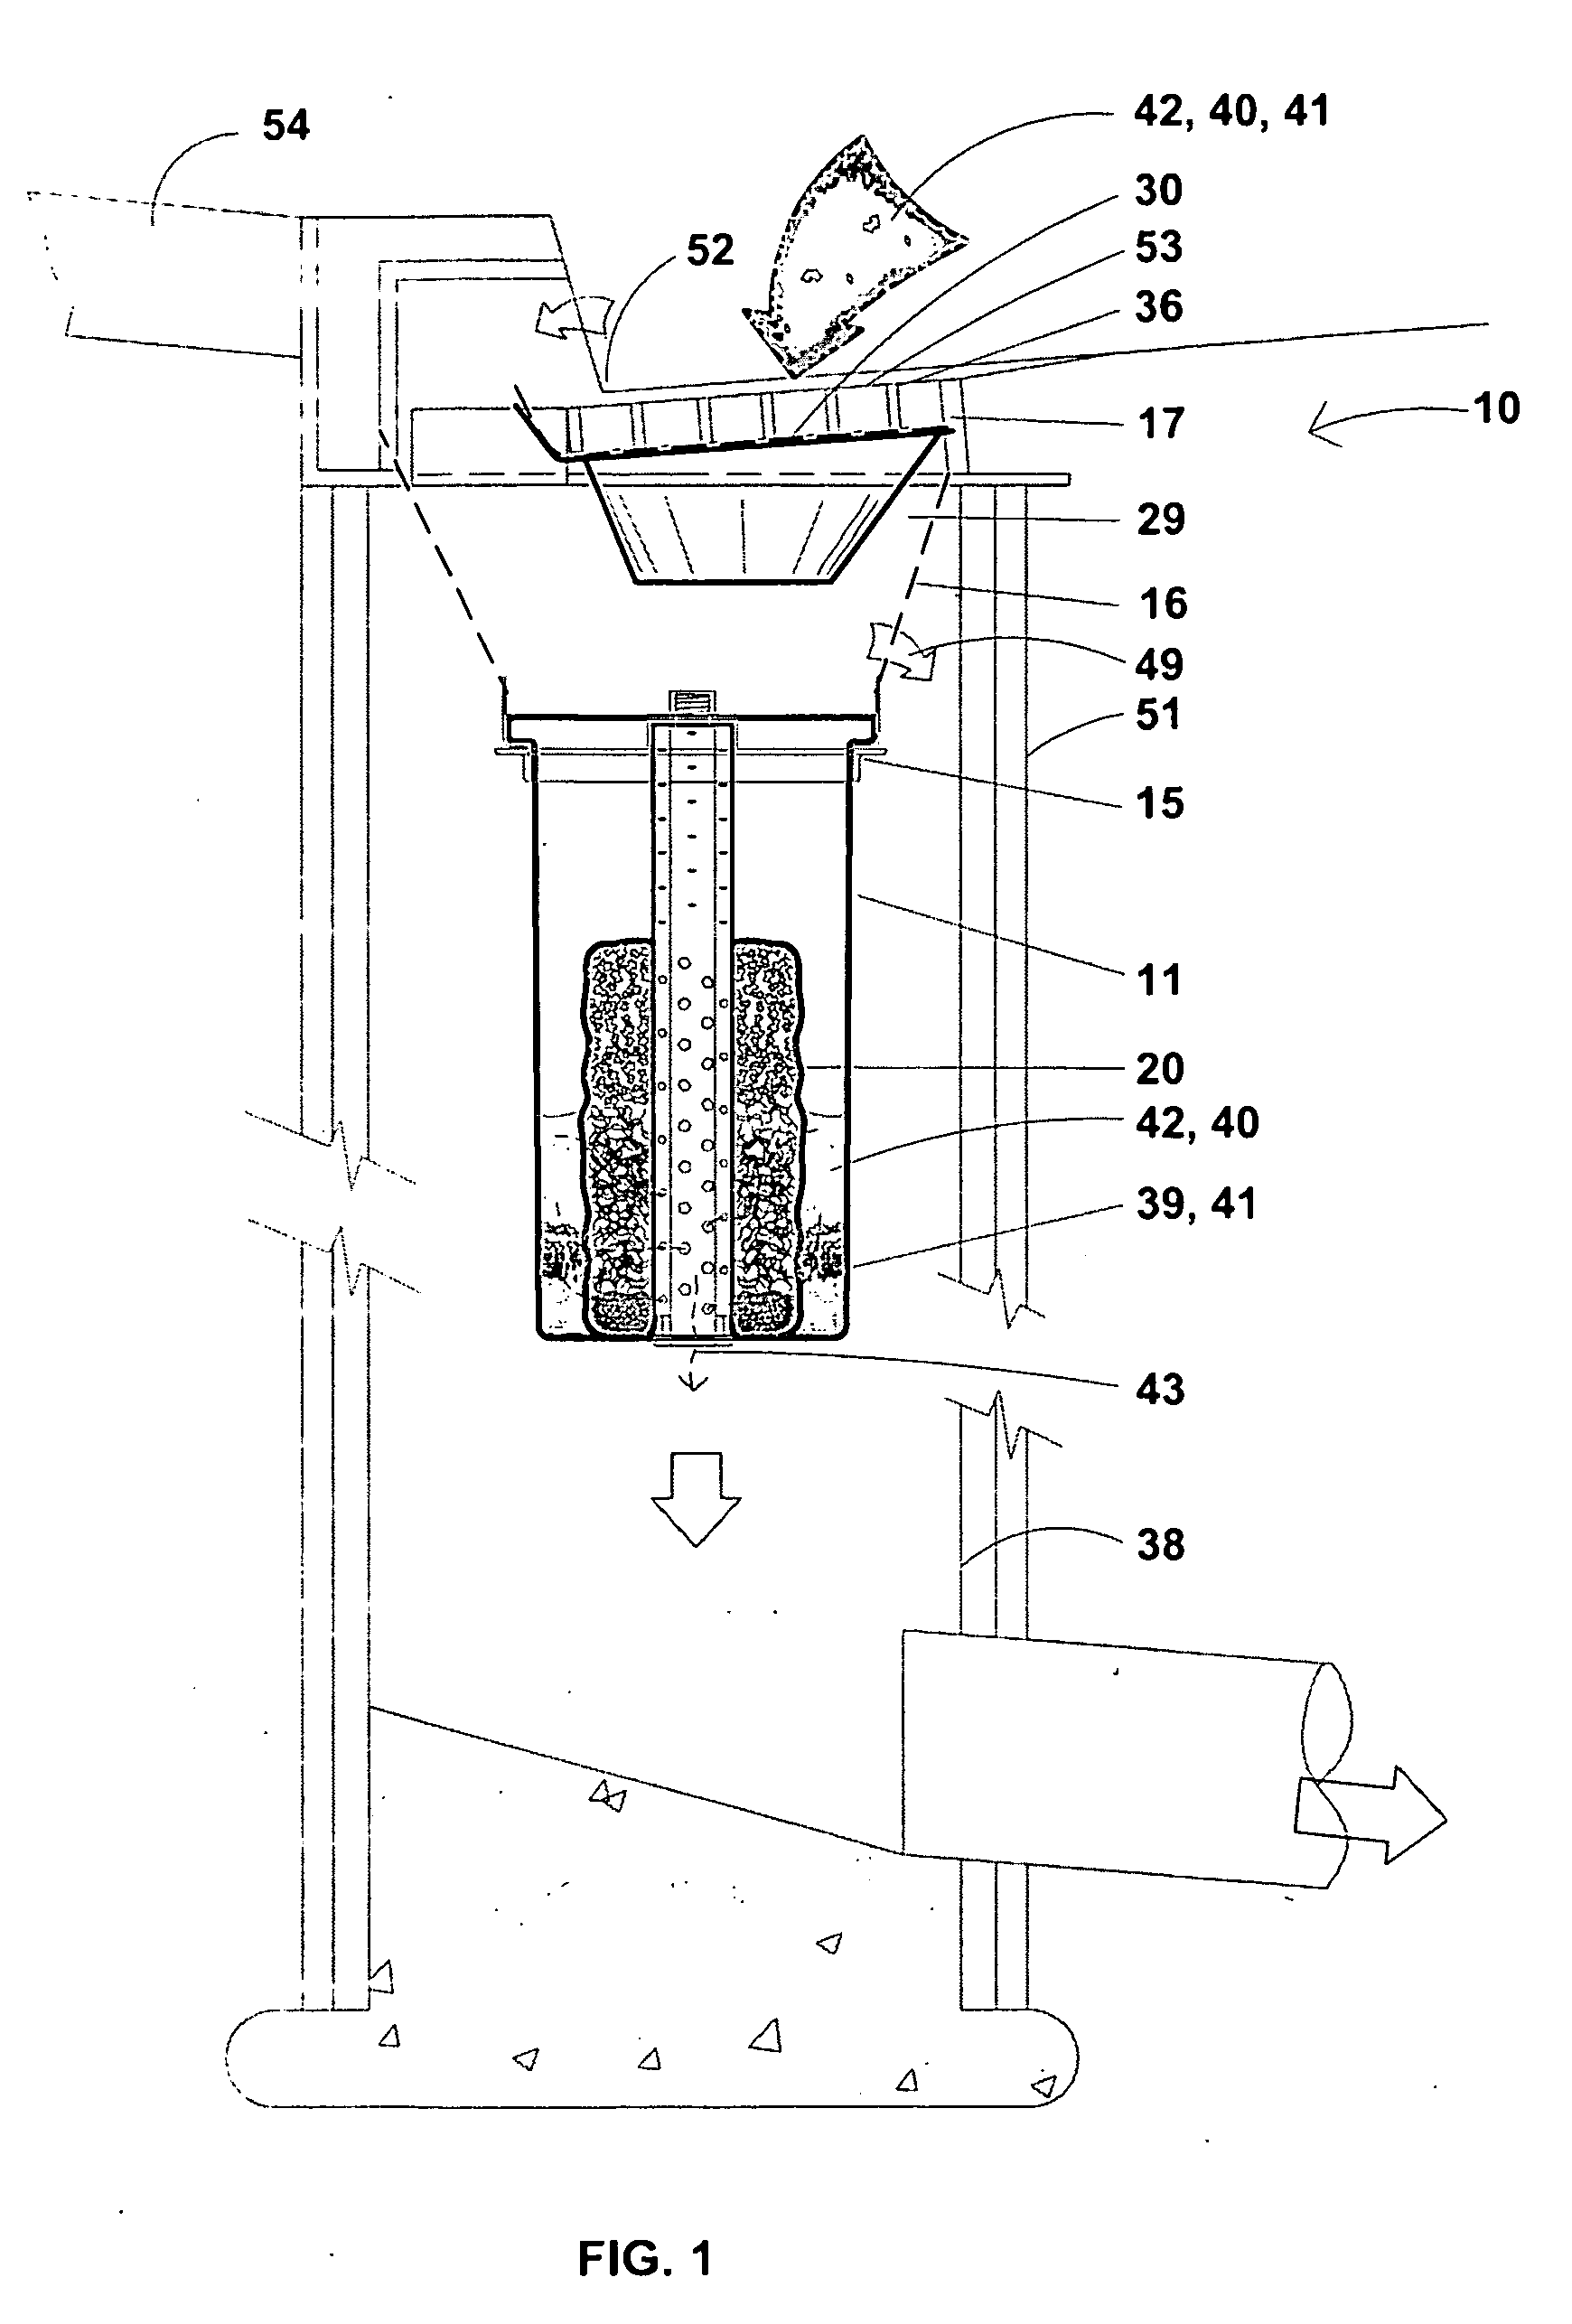 Catch basin filter absorber method for water decontamination